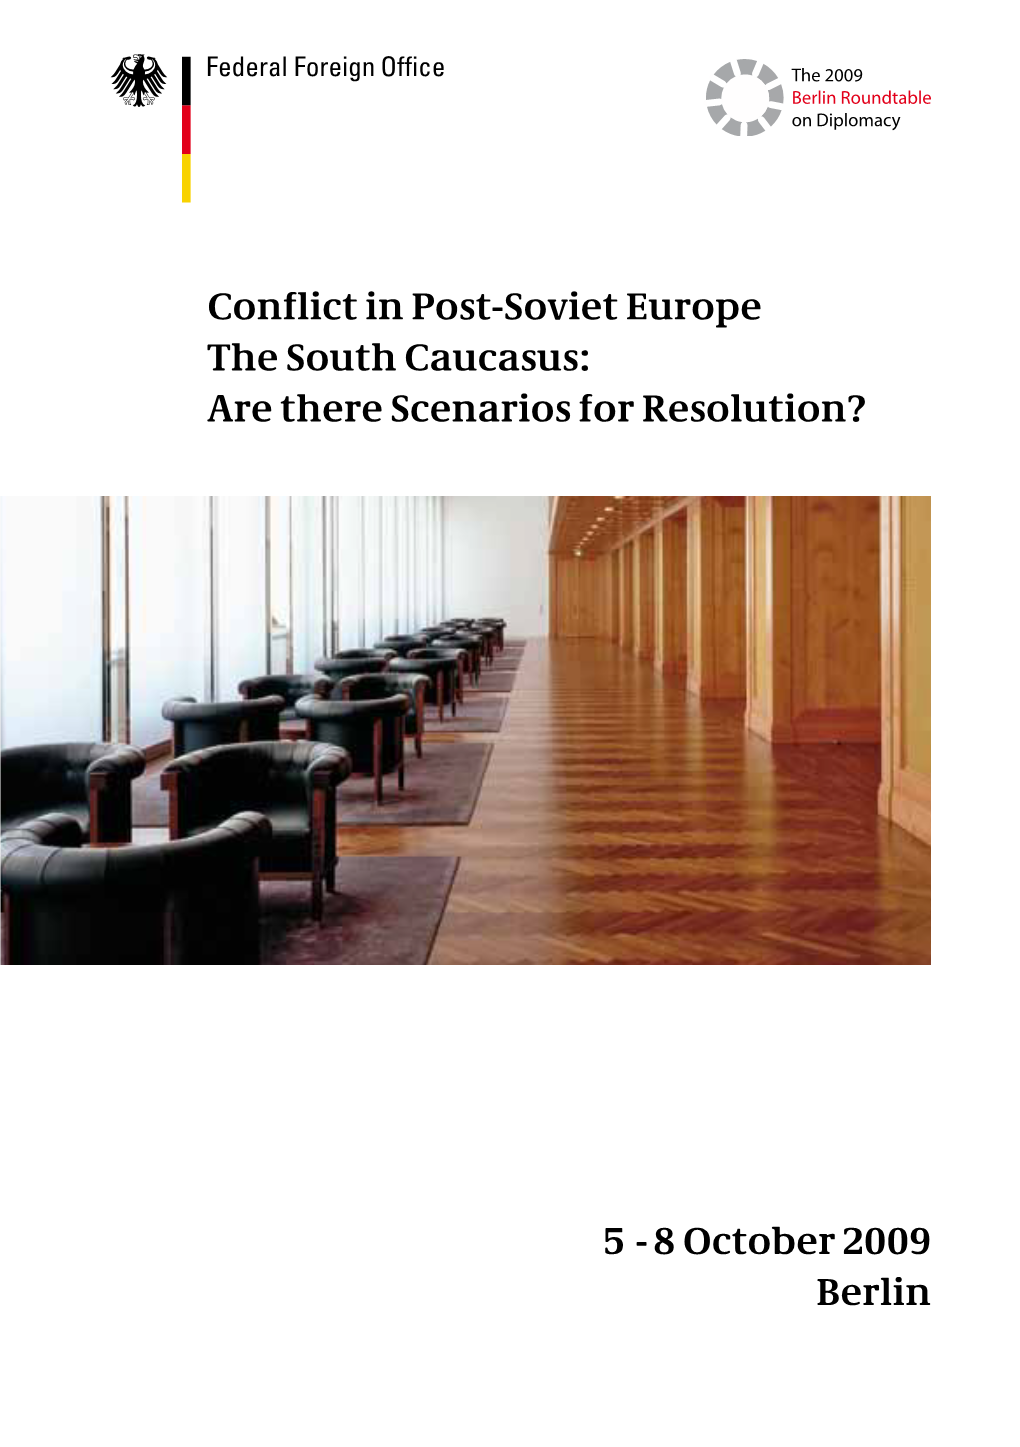 Conflict in Post-Soviet Europe the South Caucasus: Are There Scenarios for Resolution? 5